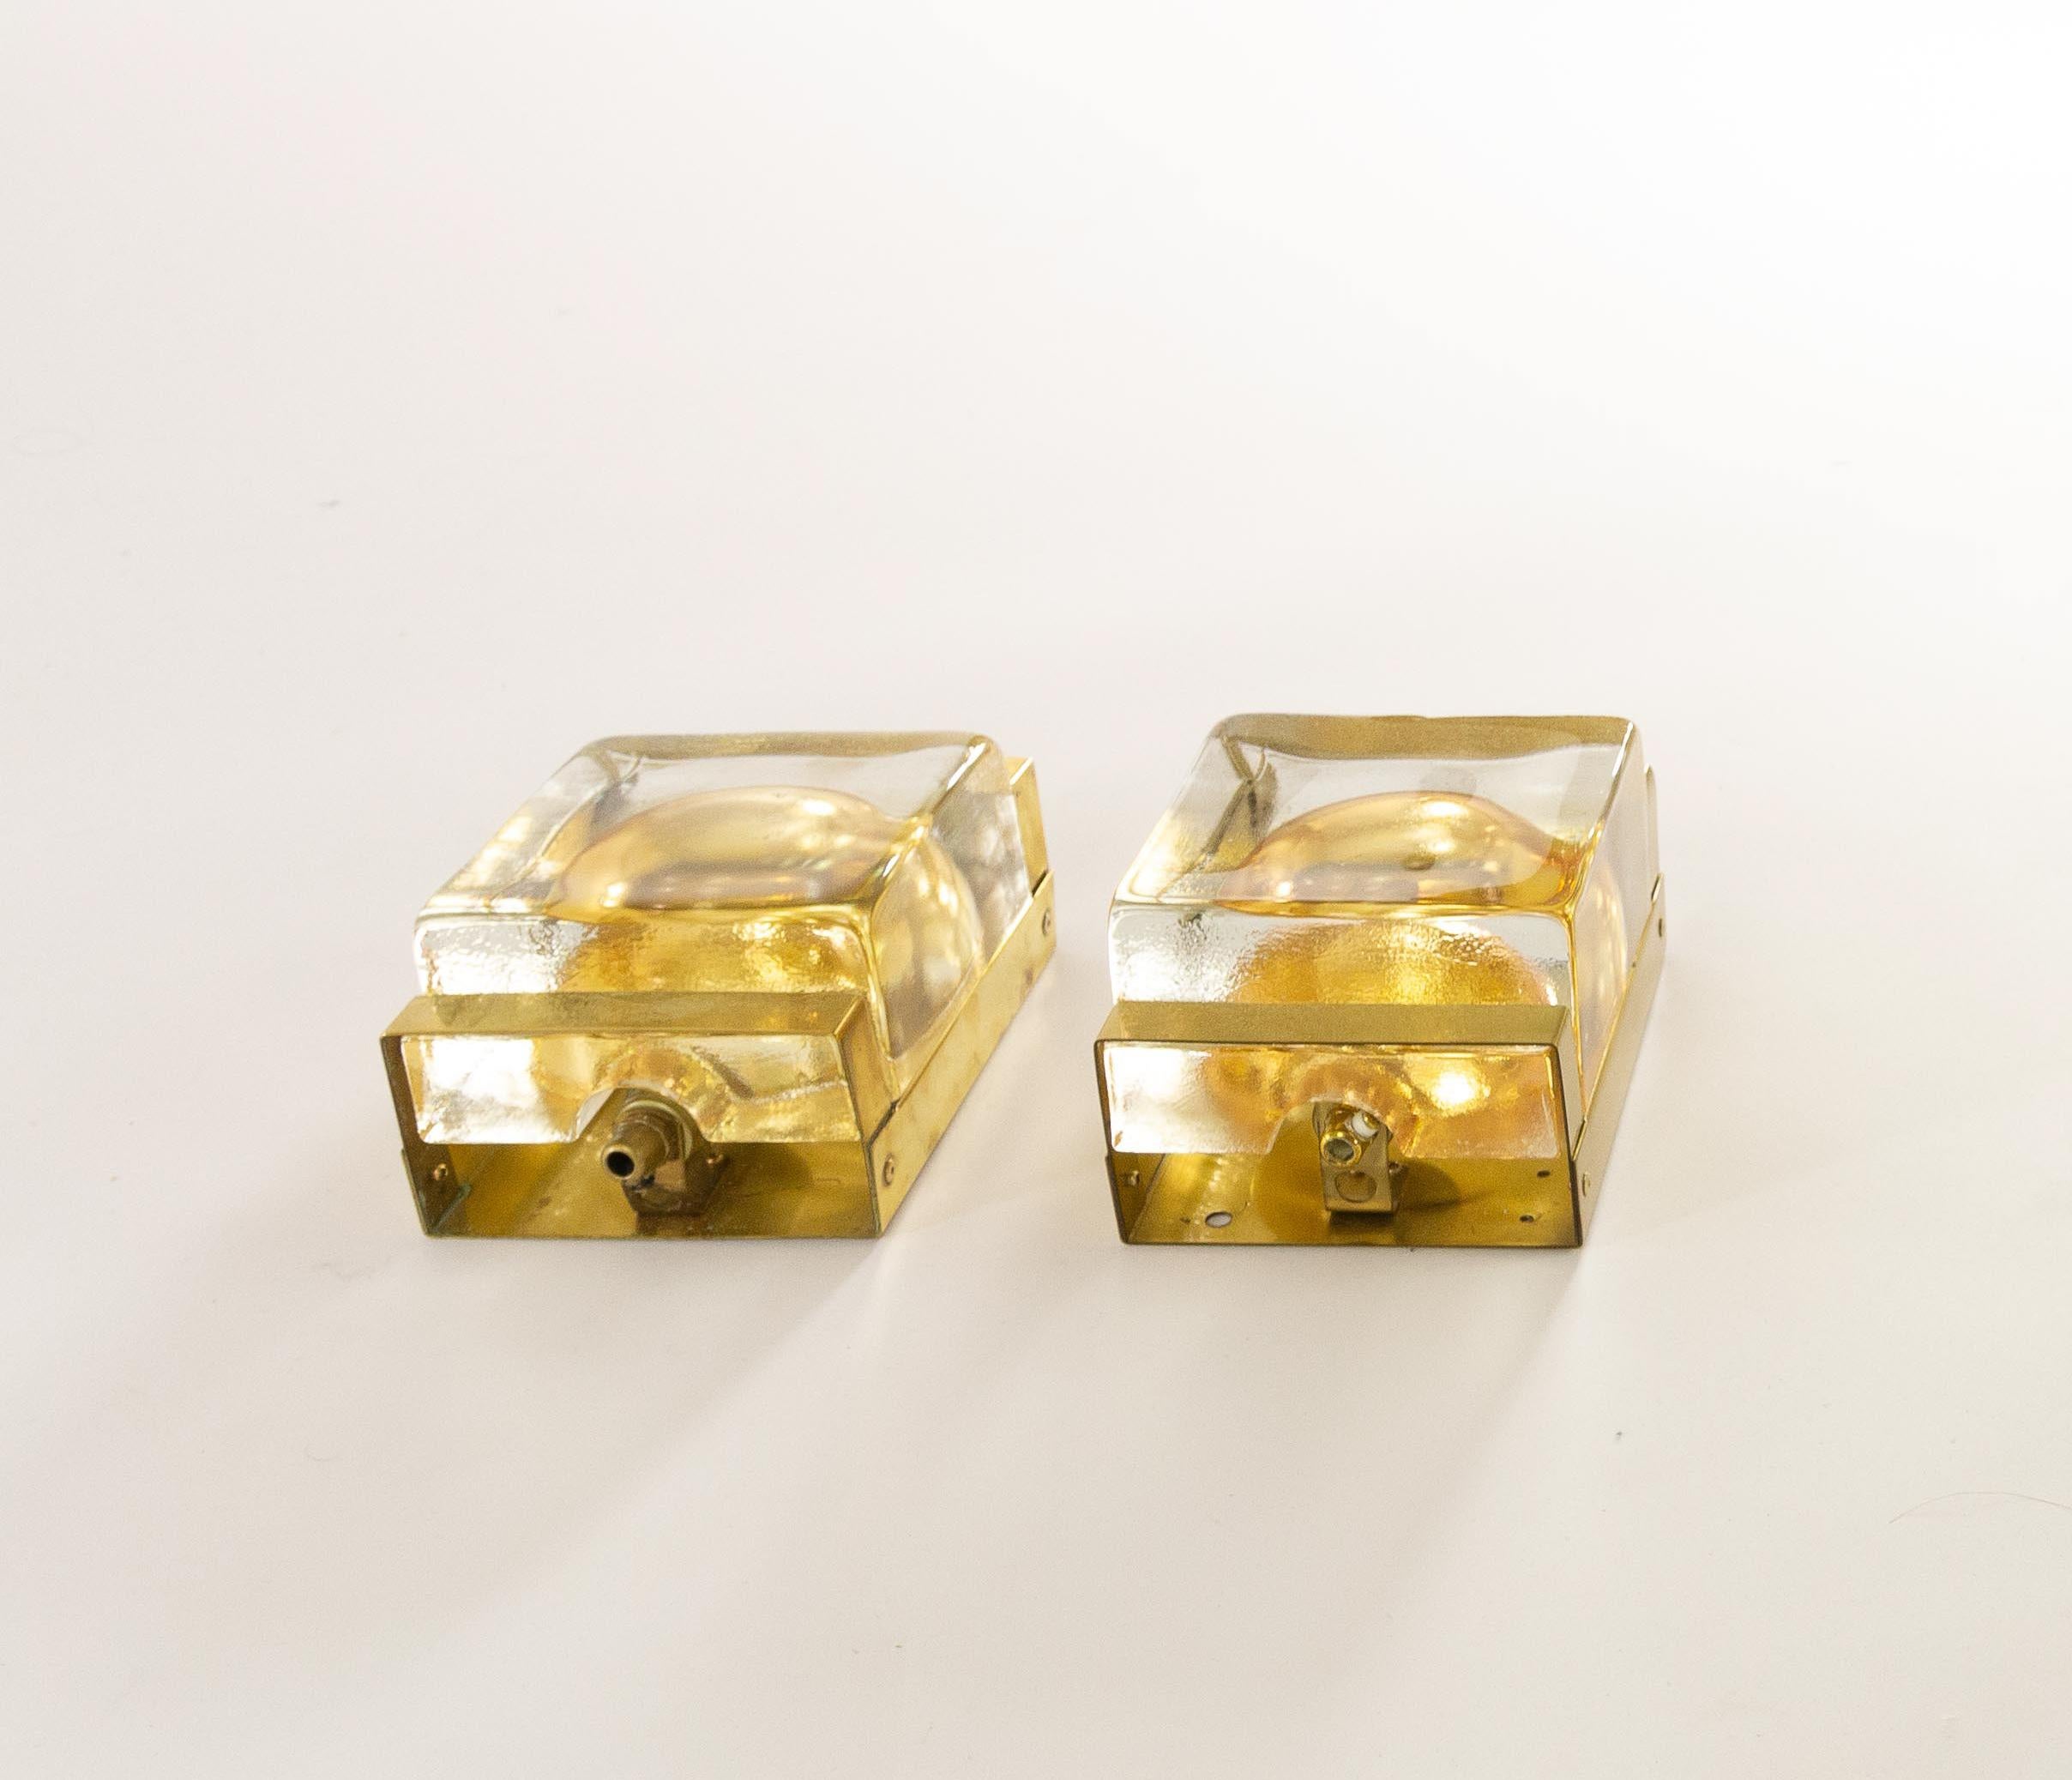 Danish Pair of Gold Maritim Glass and Brass Wall Lamps by Vitrika, 1970s For Sale